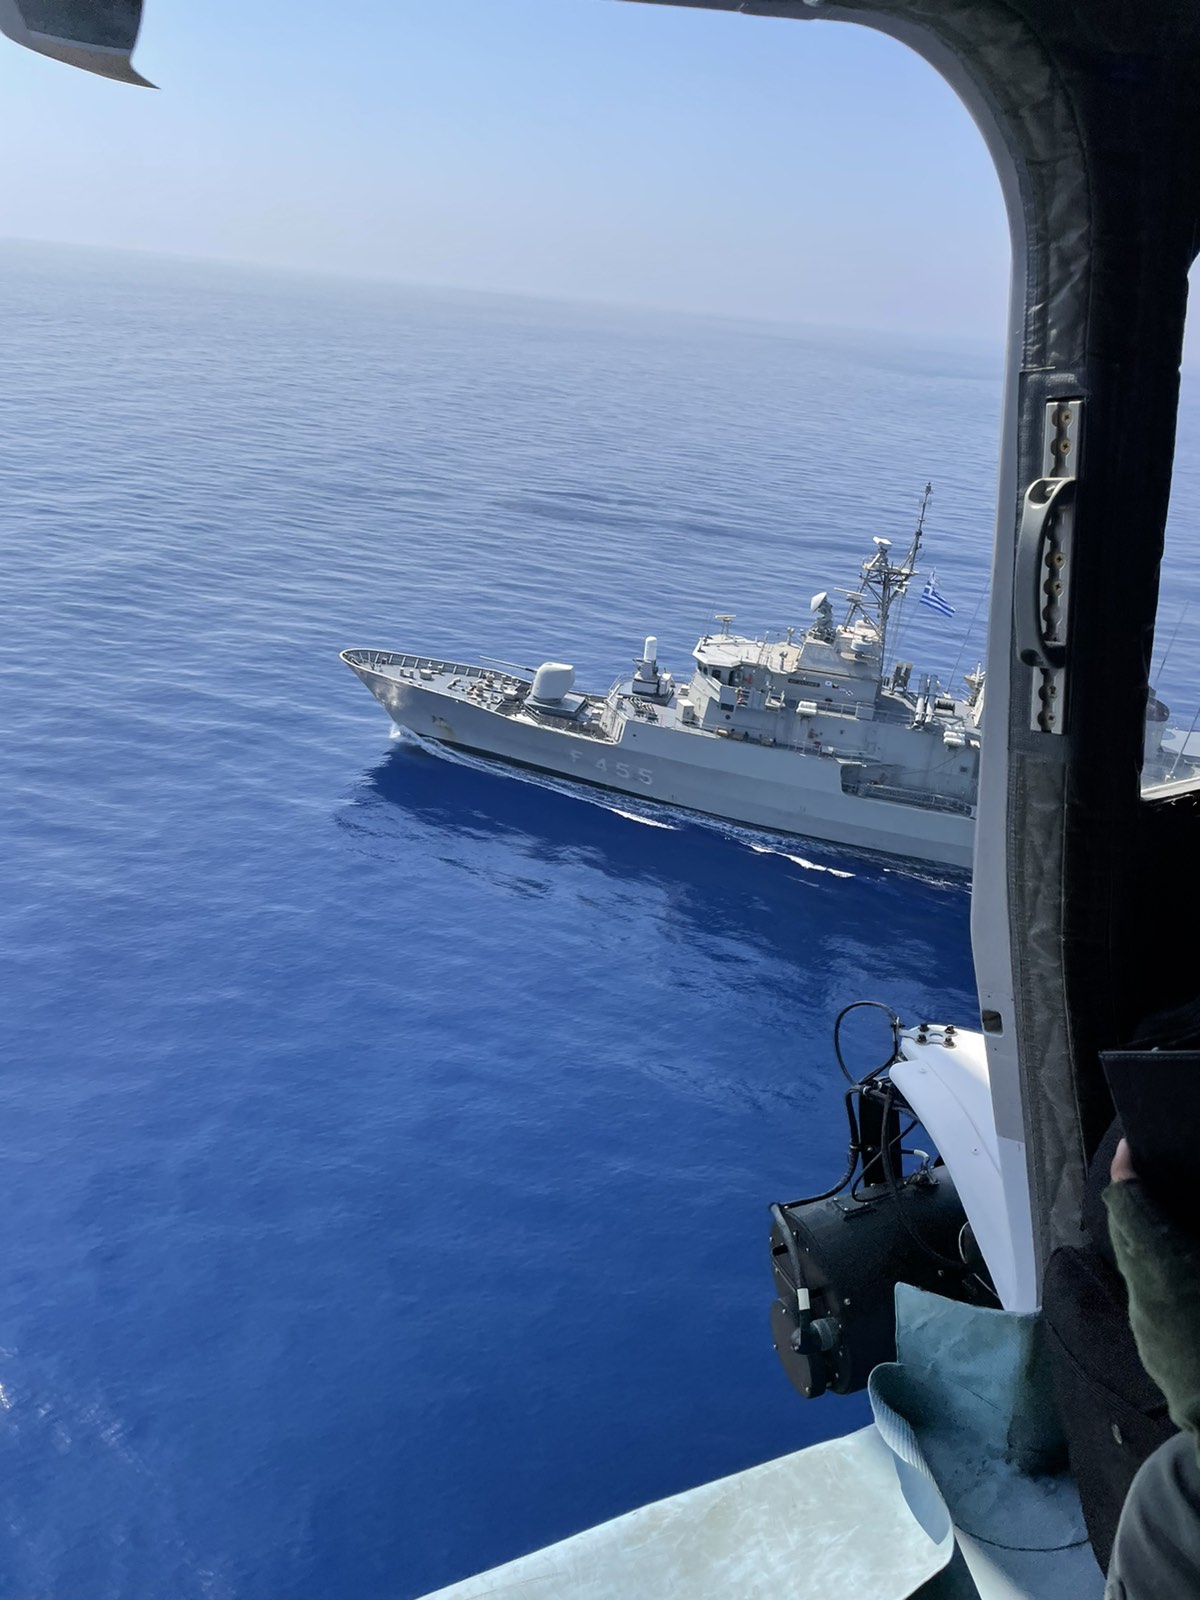 Joint Search and Rescue Exercise between Cyprus and Greece “ SALAMIS 04-21 “ 